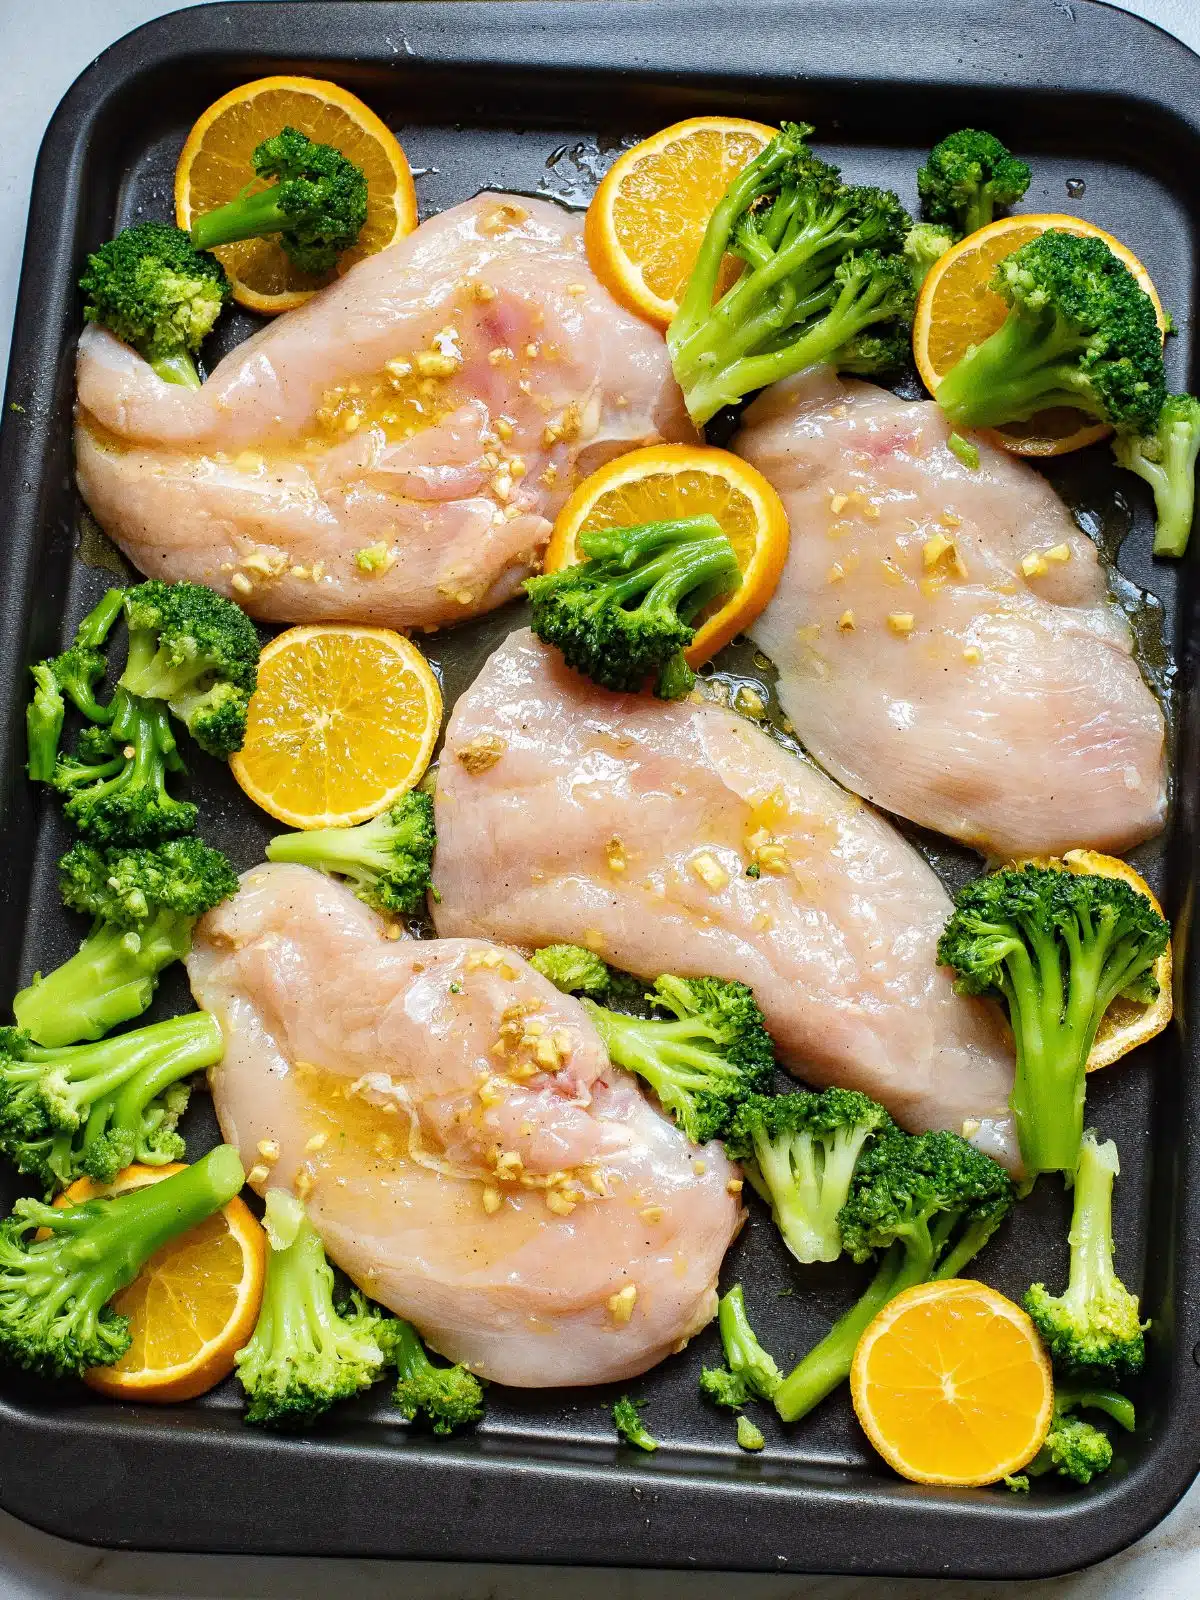 chicken cutlets, broccoli, and orange slices on a sheet pan before baking